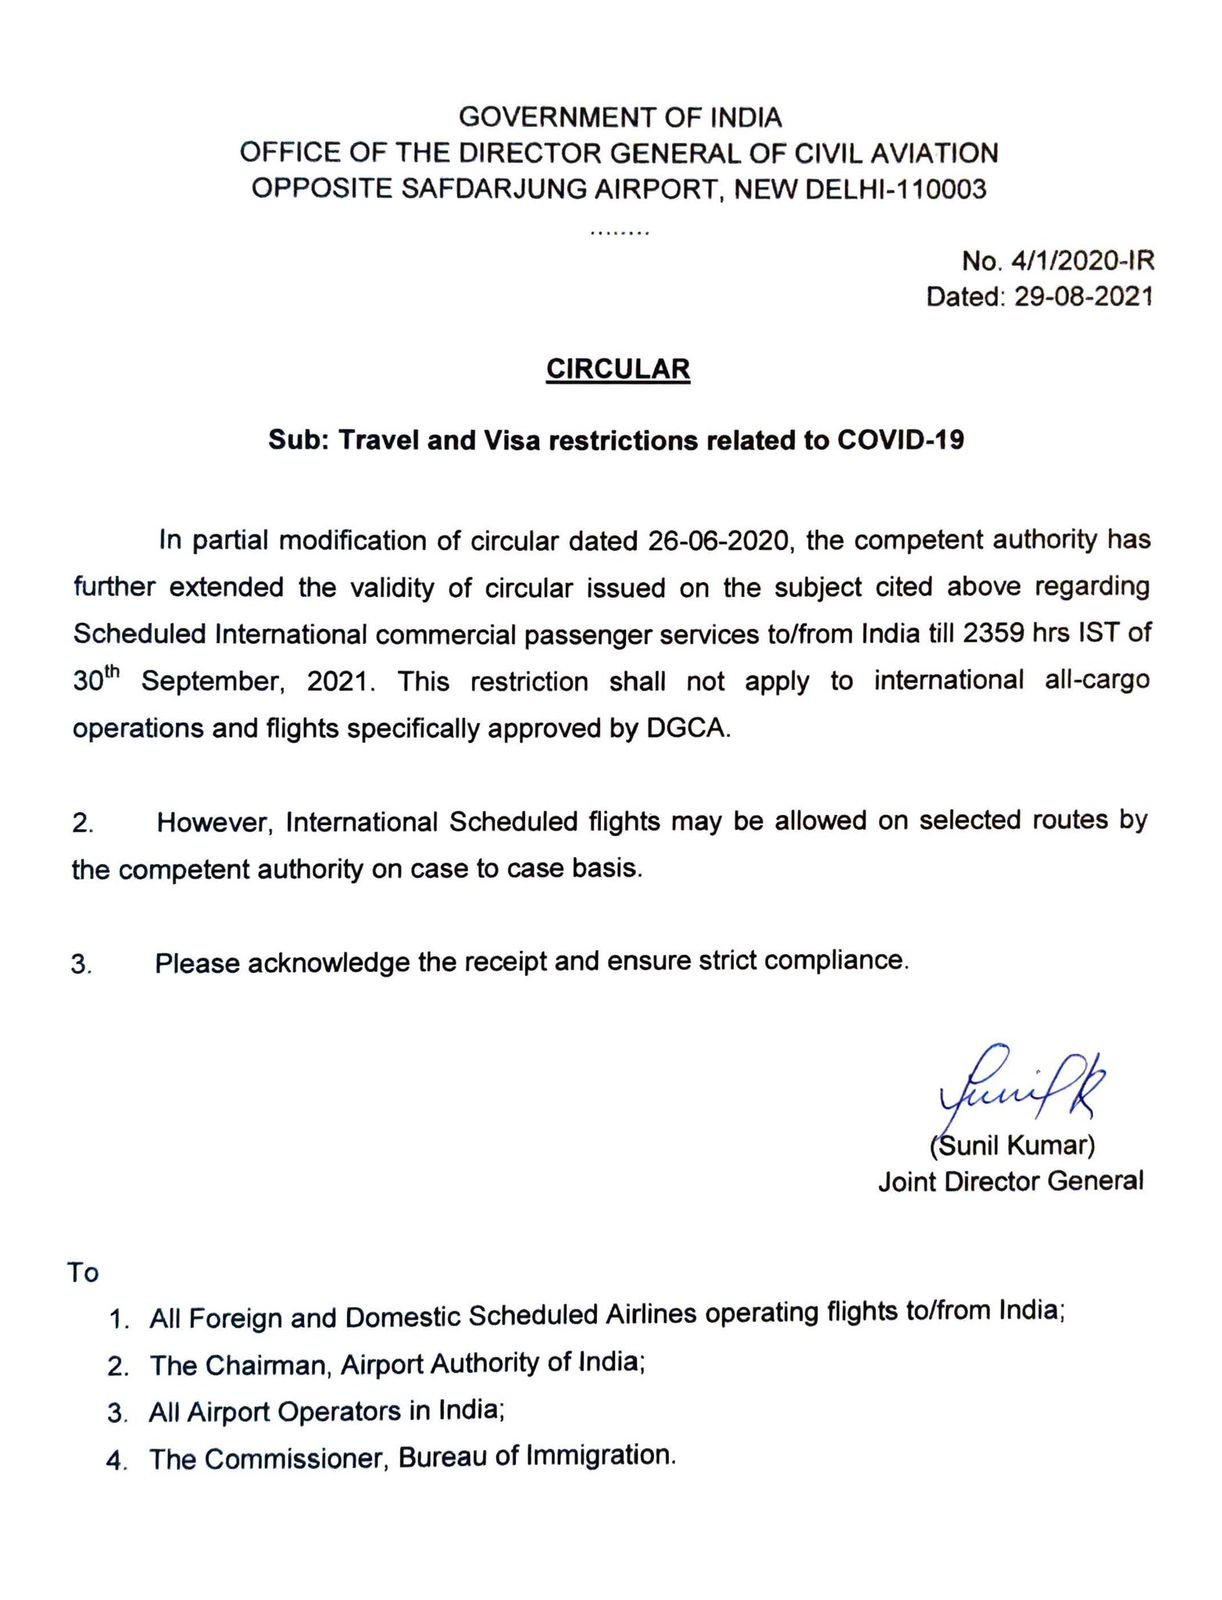 The government extends suspension on international scheduled commercial passenger flights